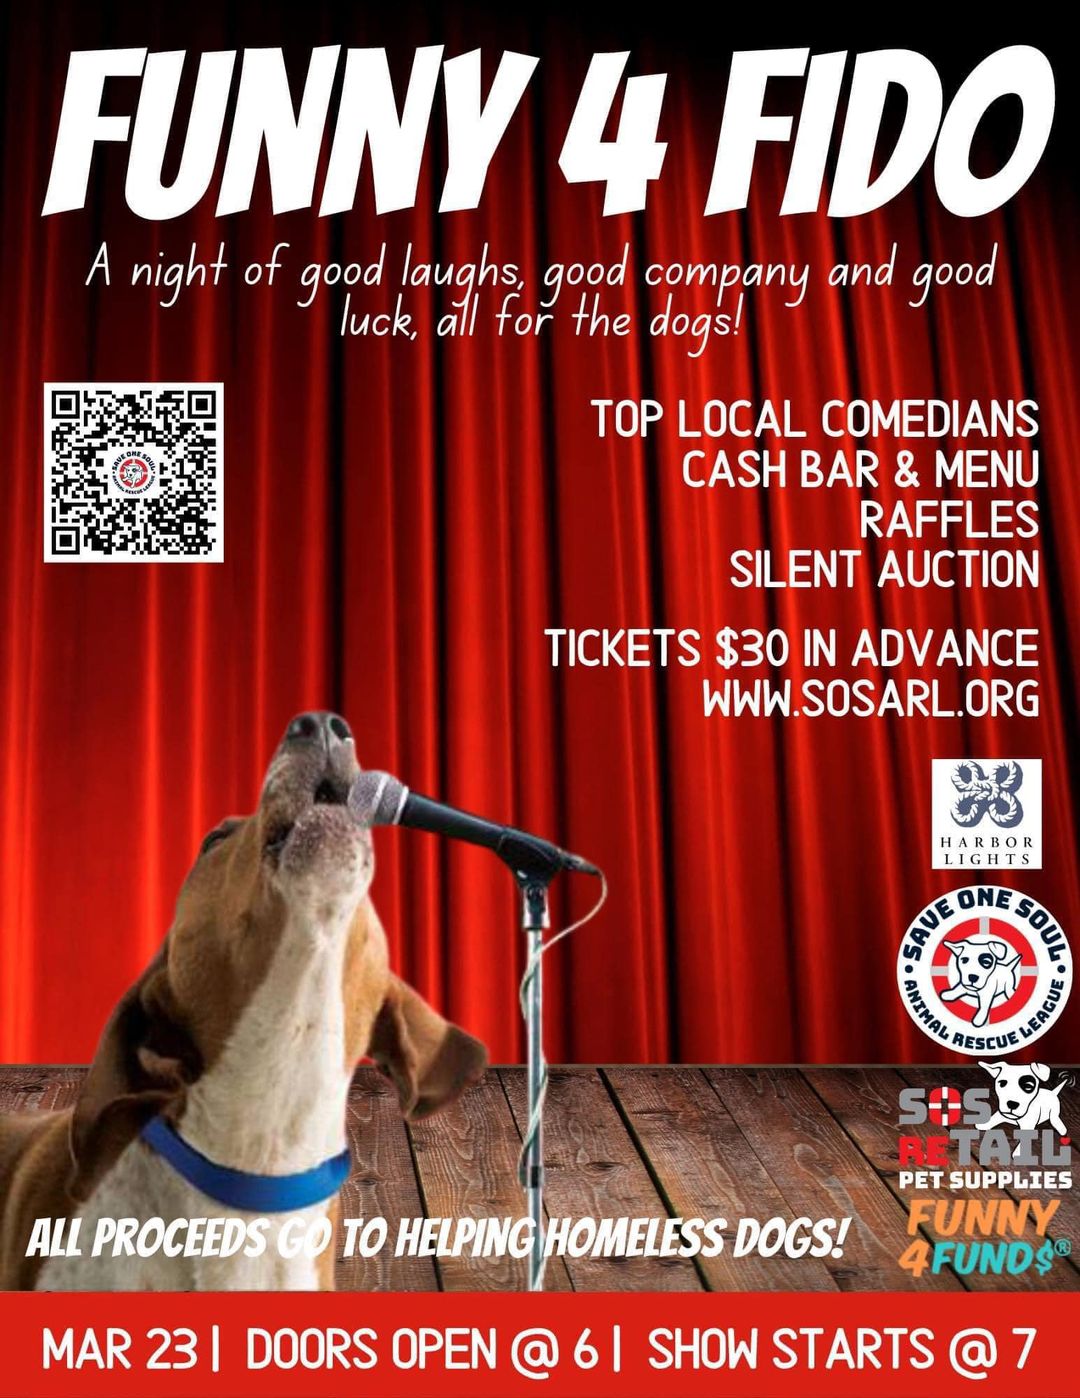 The Harbor Lights Comedy Dog Benefit show is Saturday, March 23. Proceeds benefit homeless dogs.